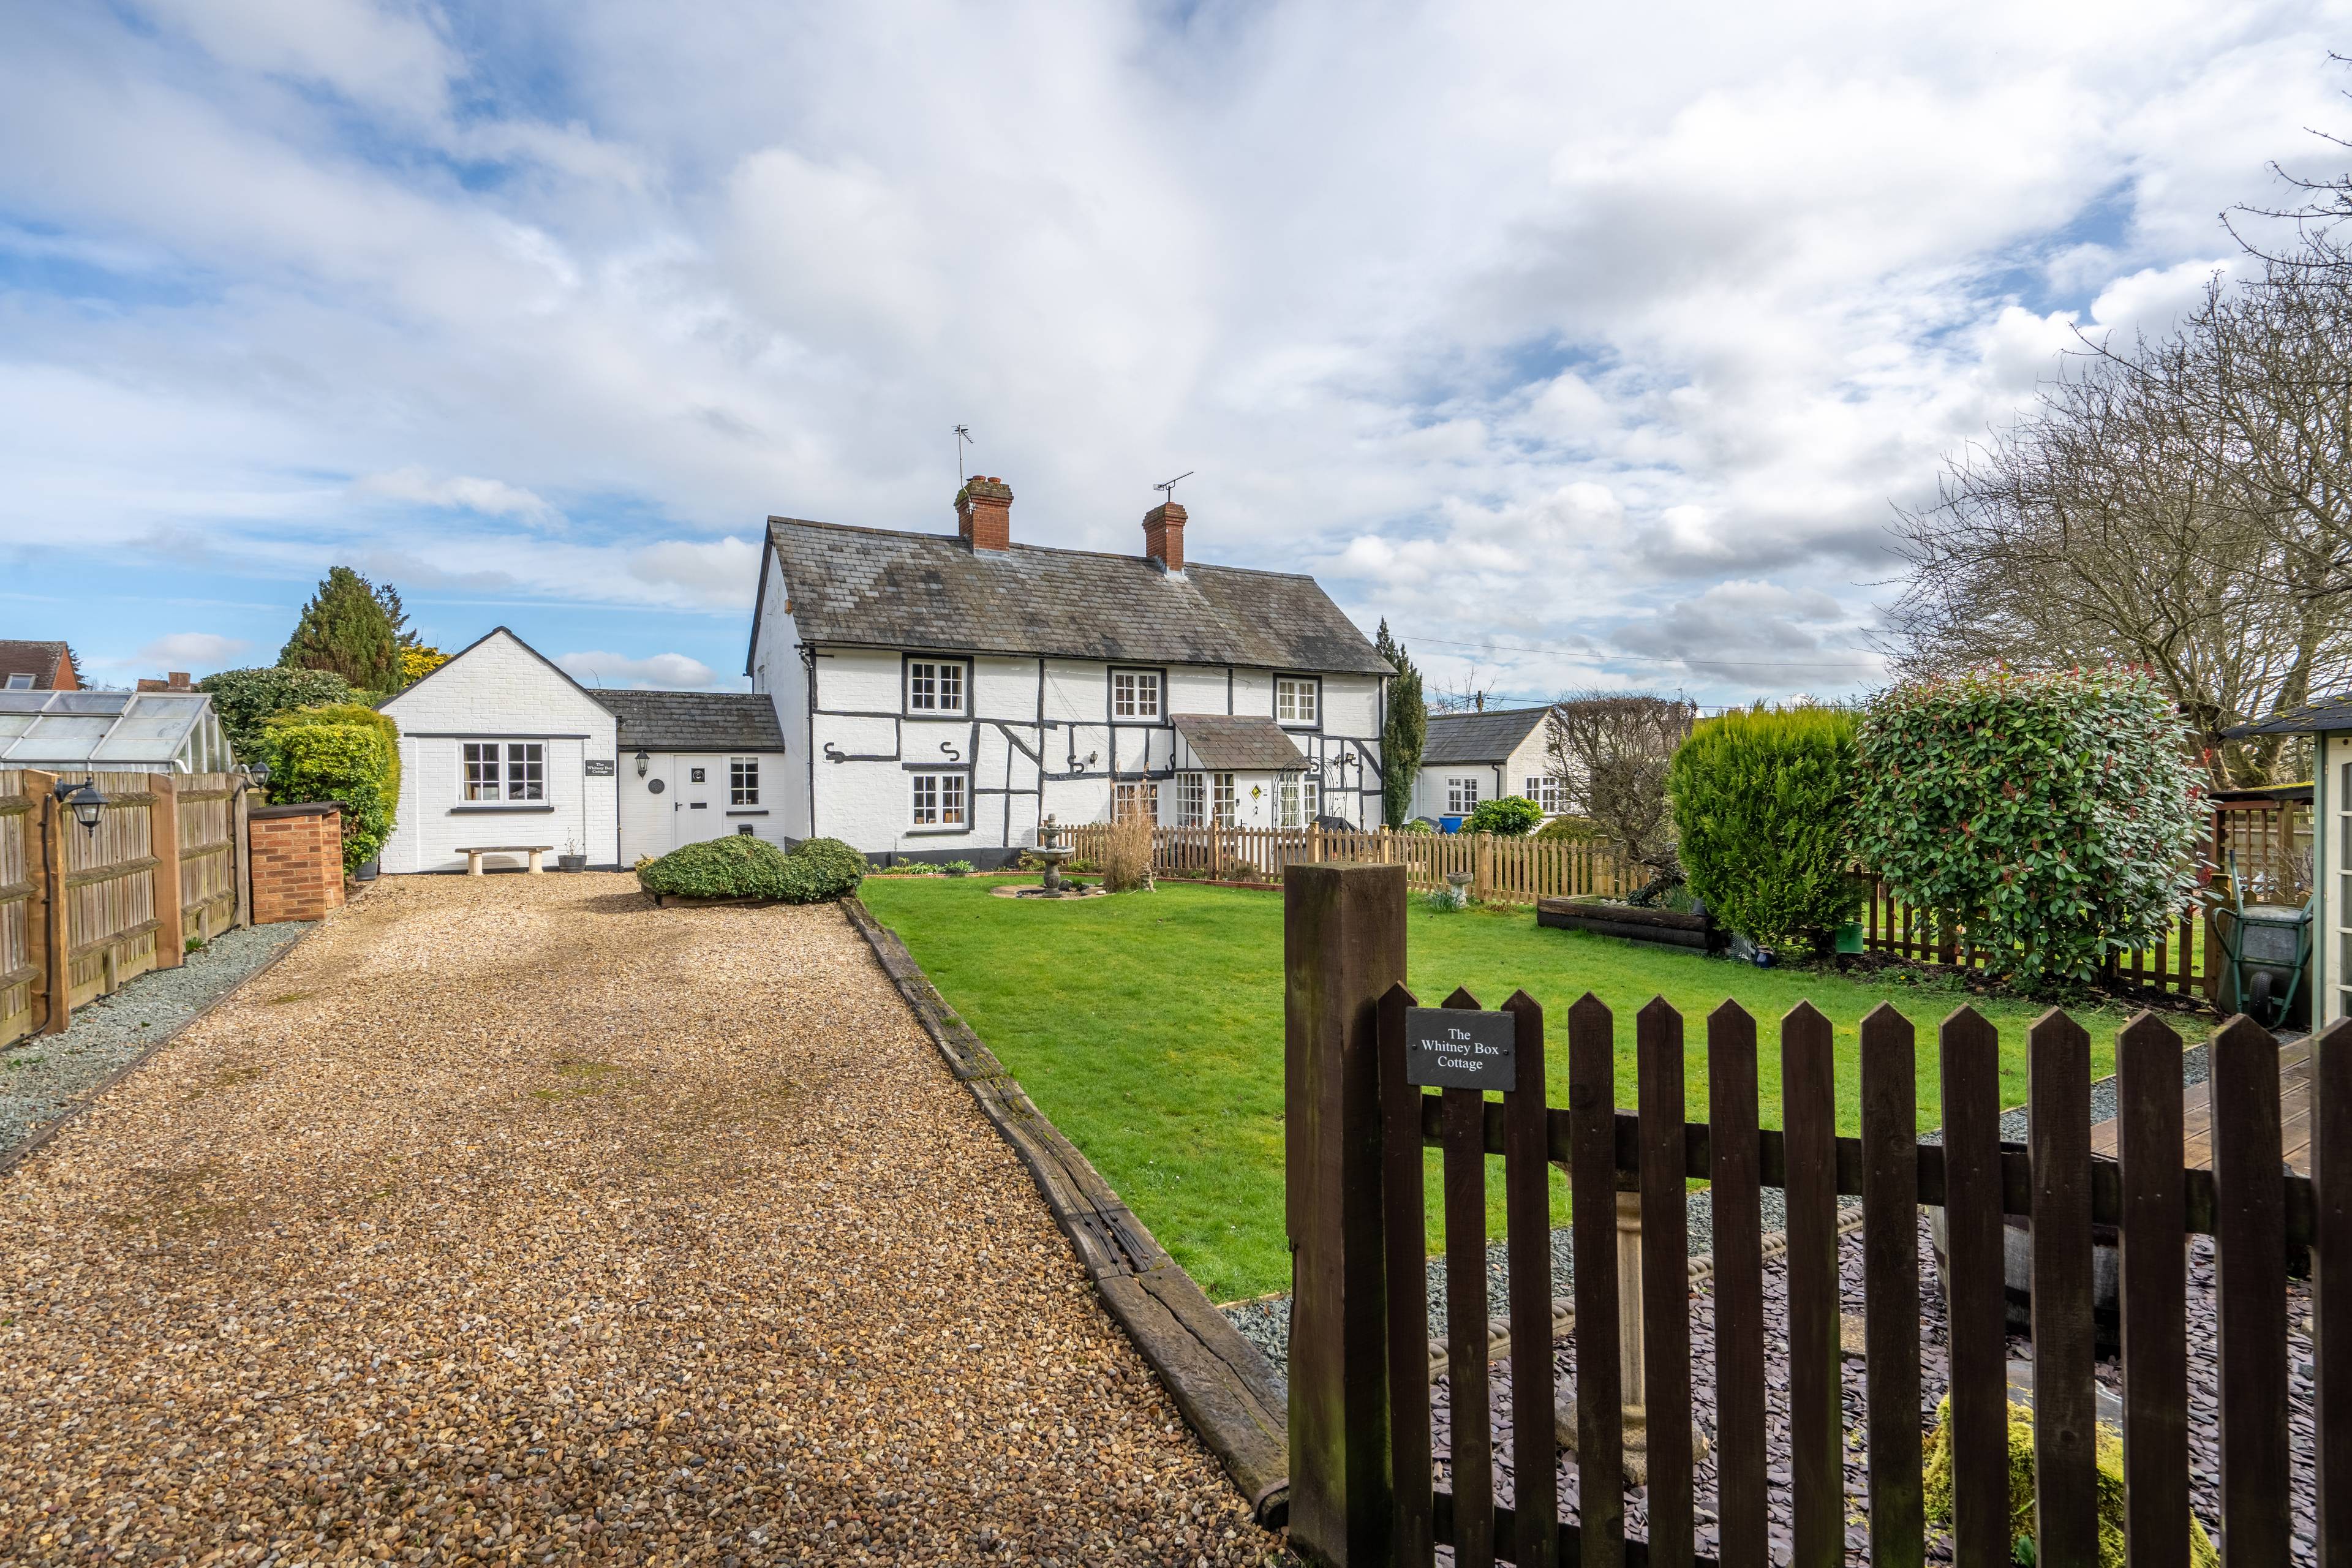 The Whitney Box Cottage, Church Street, Maids Moreton, MK18 1QE, Grade II. 2 Bedrooms 2 reception rooms. Period Cottage tucked away in village location.